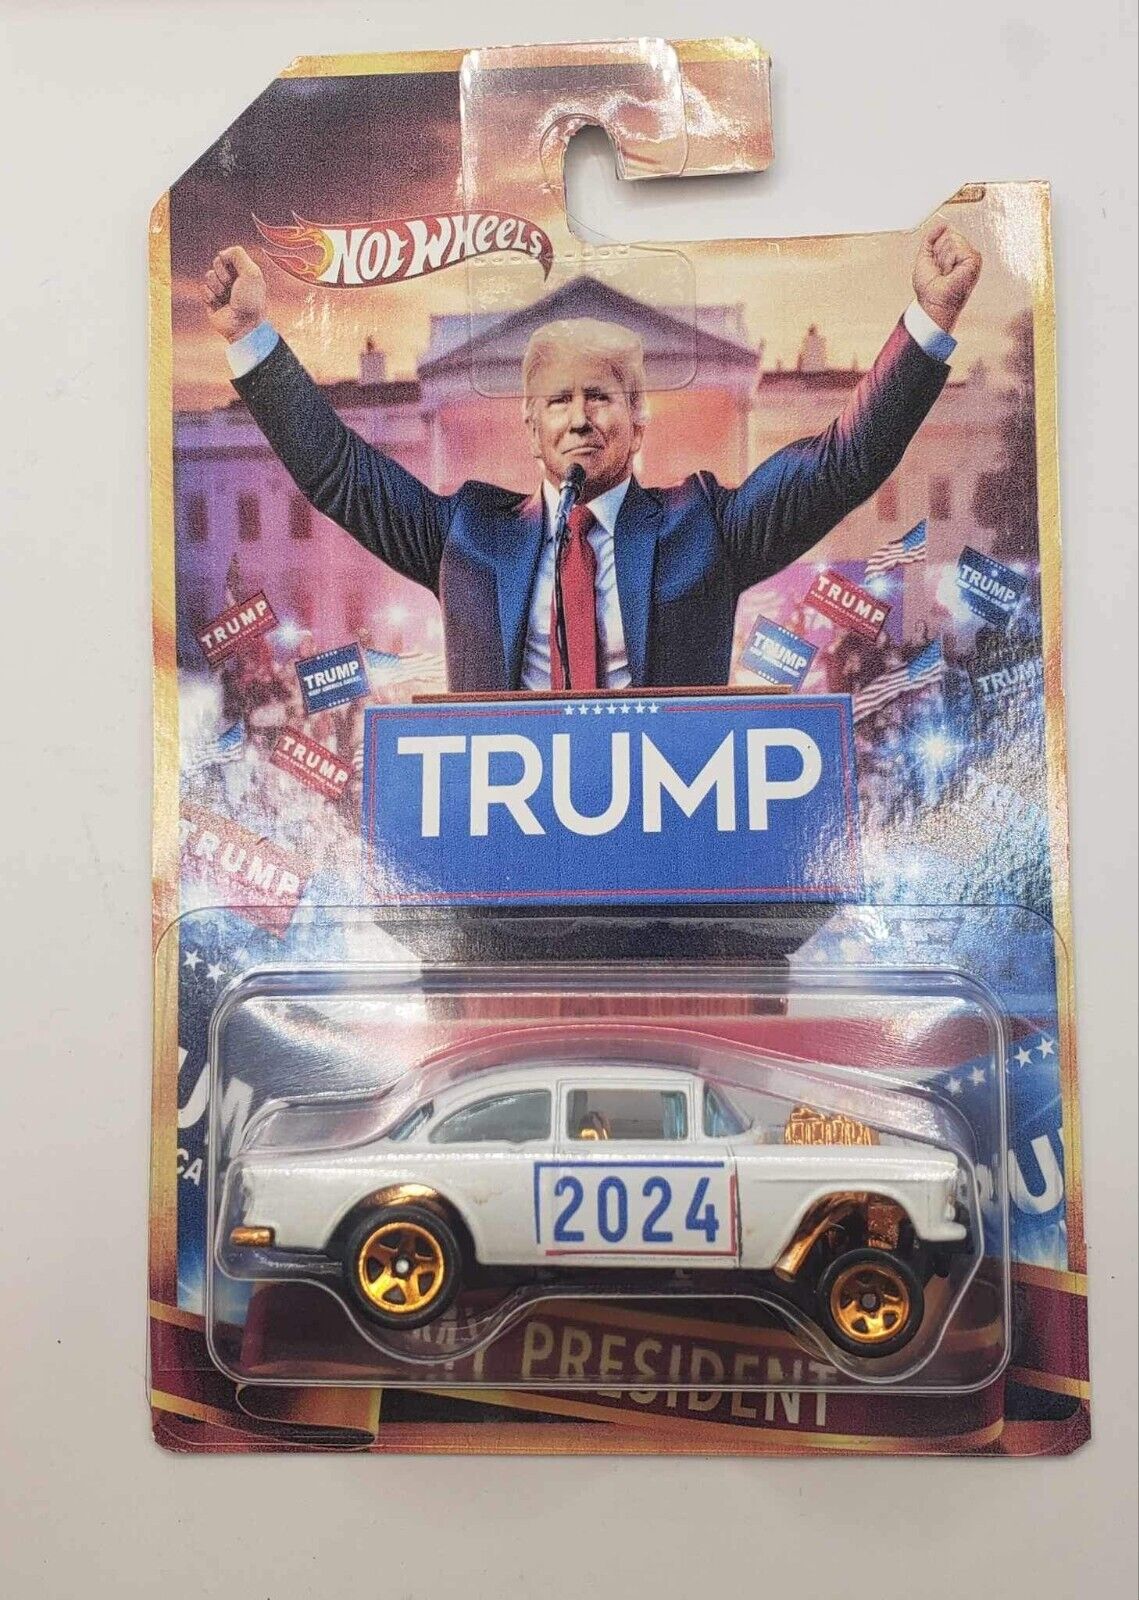 Hot wheels Custom made Donald Trump ,First 10 people buy gets 